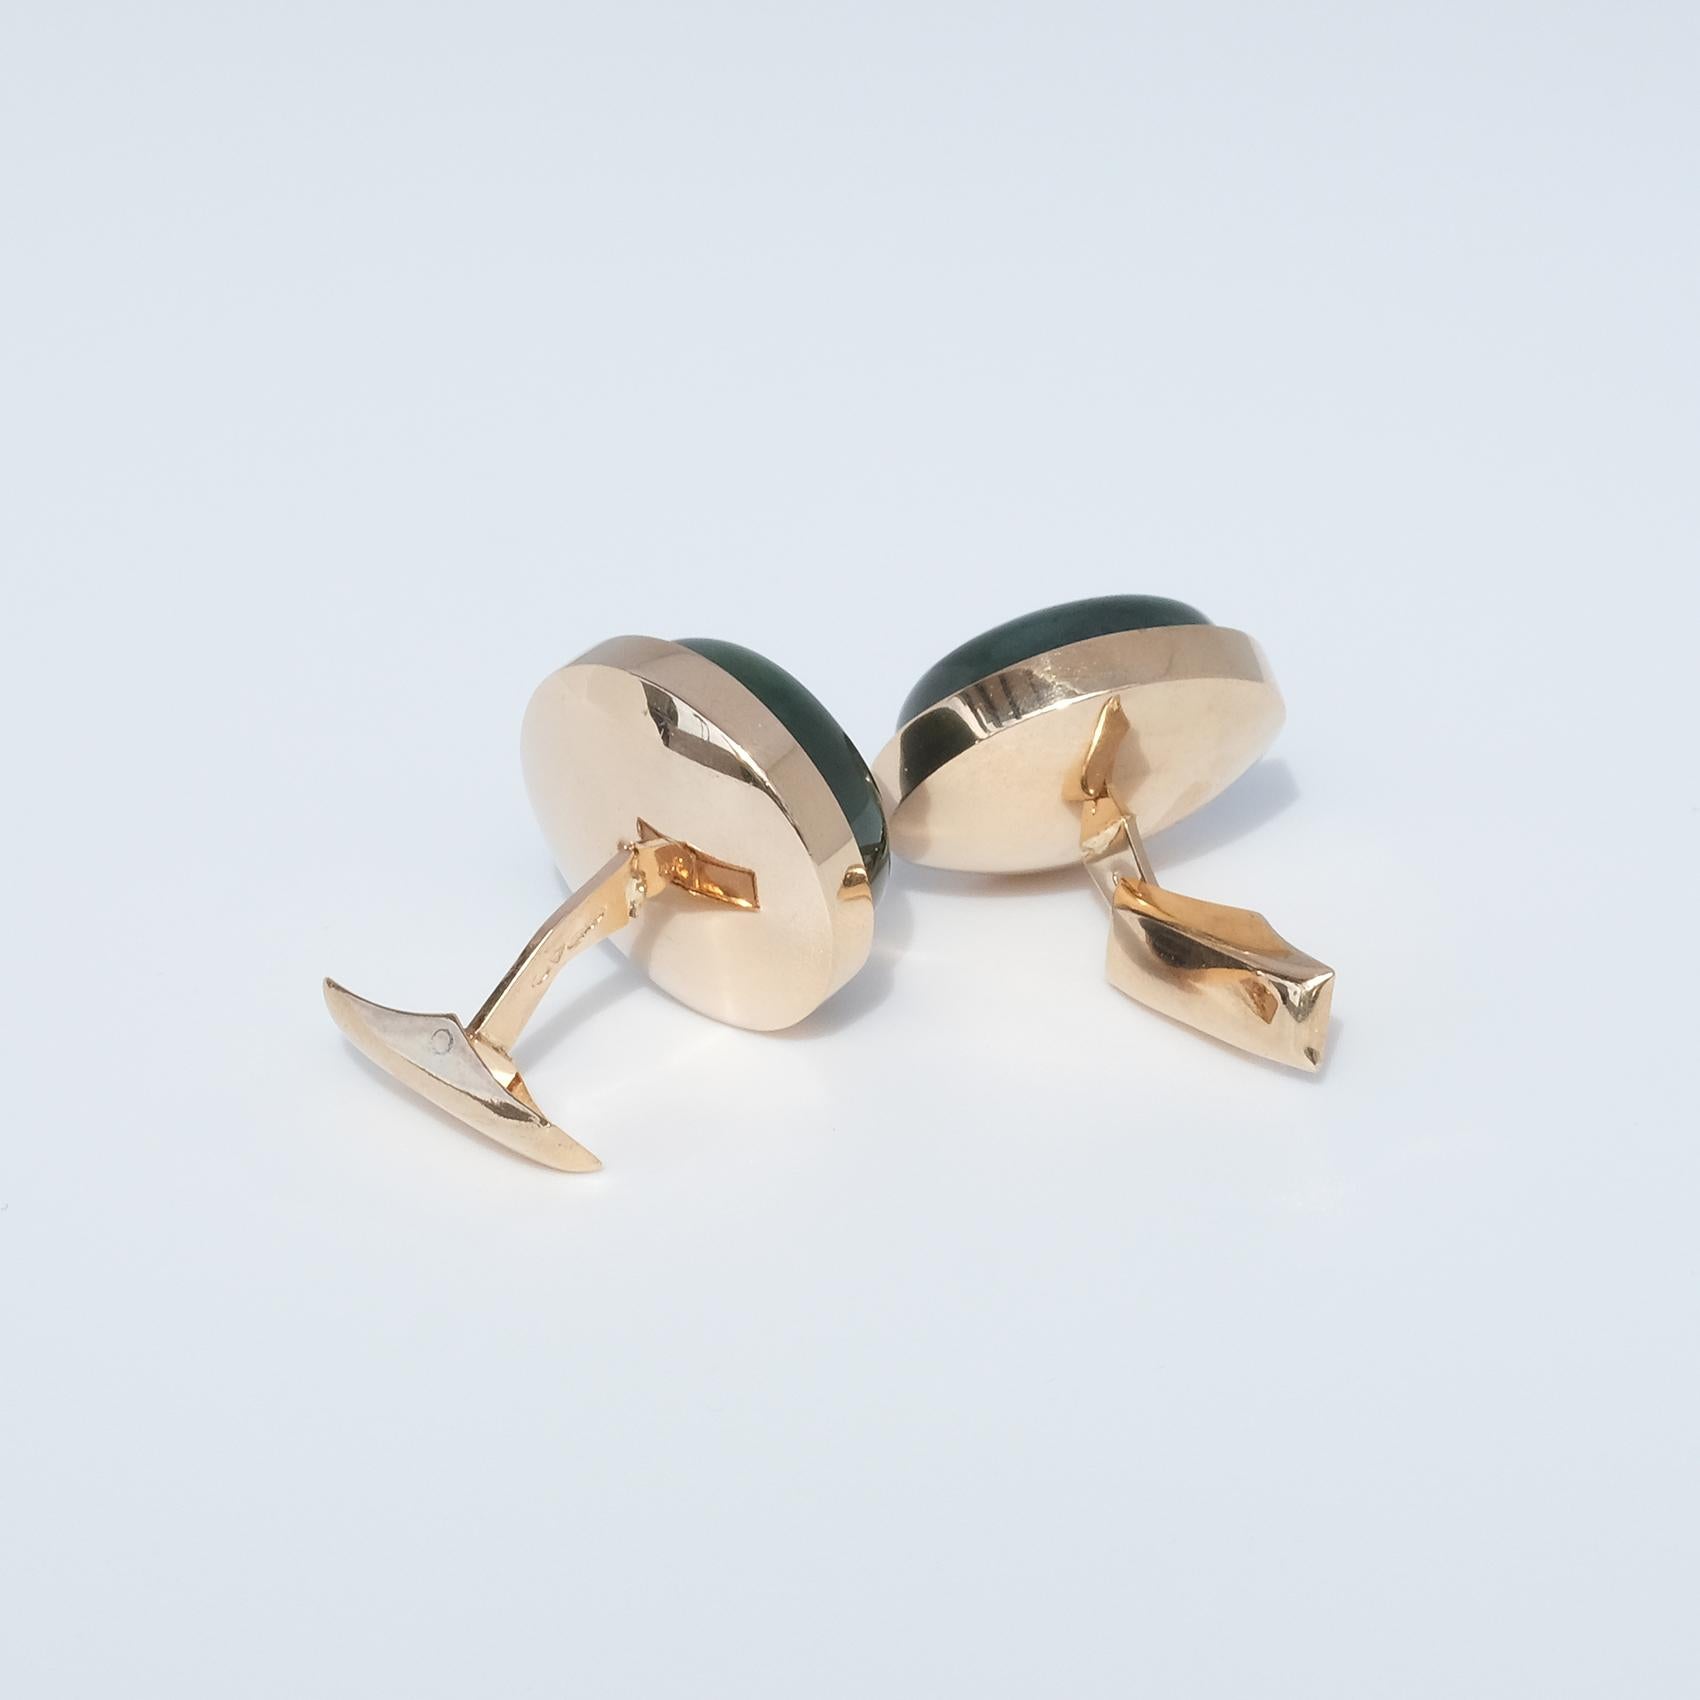 Pair of 14 K Gold Cufflinks Made in 1976 For Sale 3